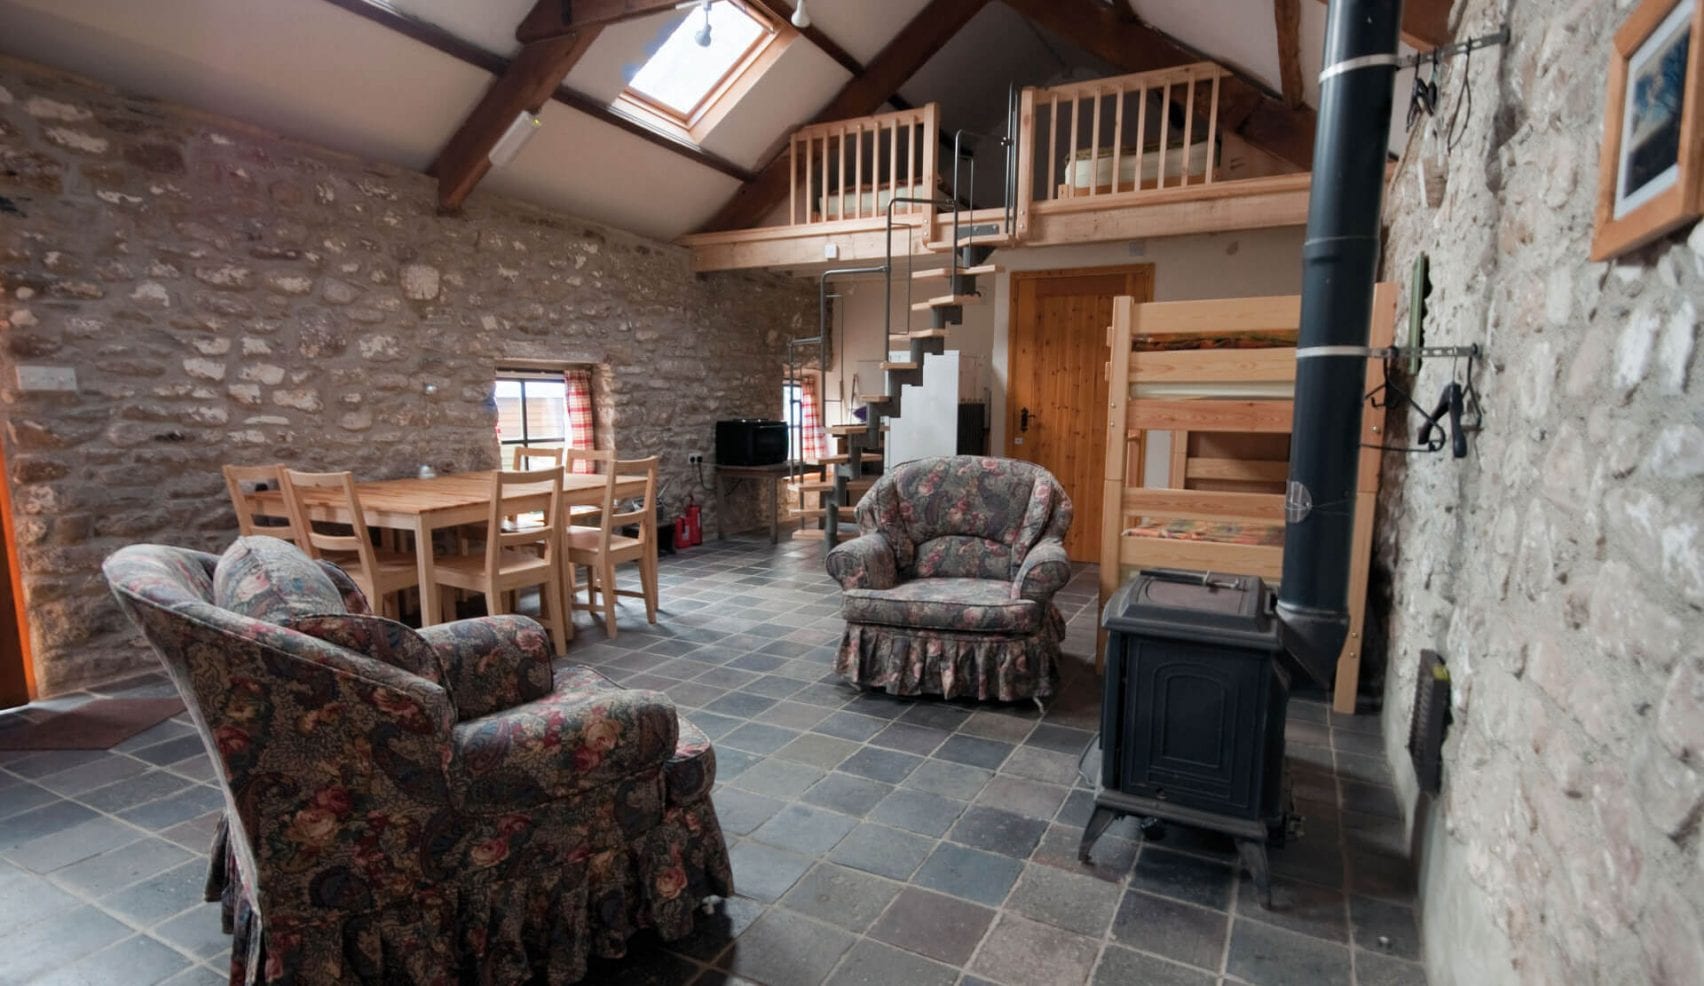 The Long Barn Self Catering Accommodation